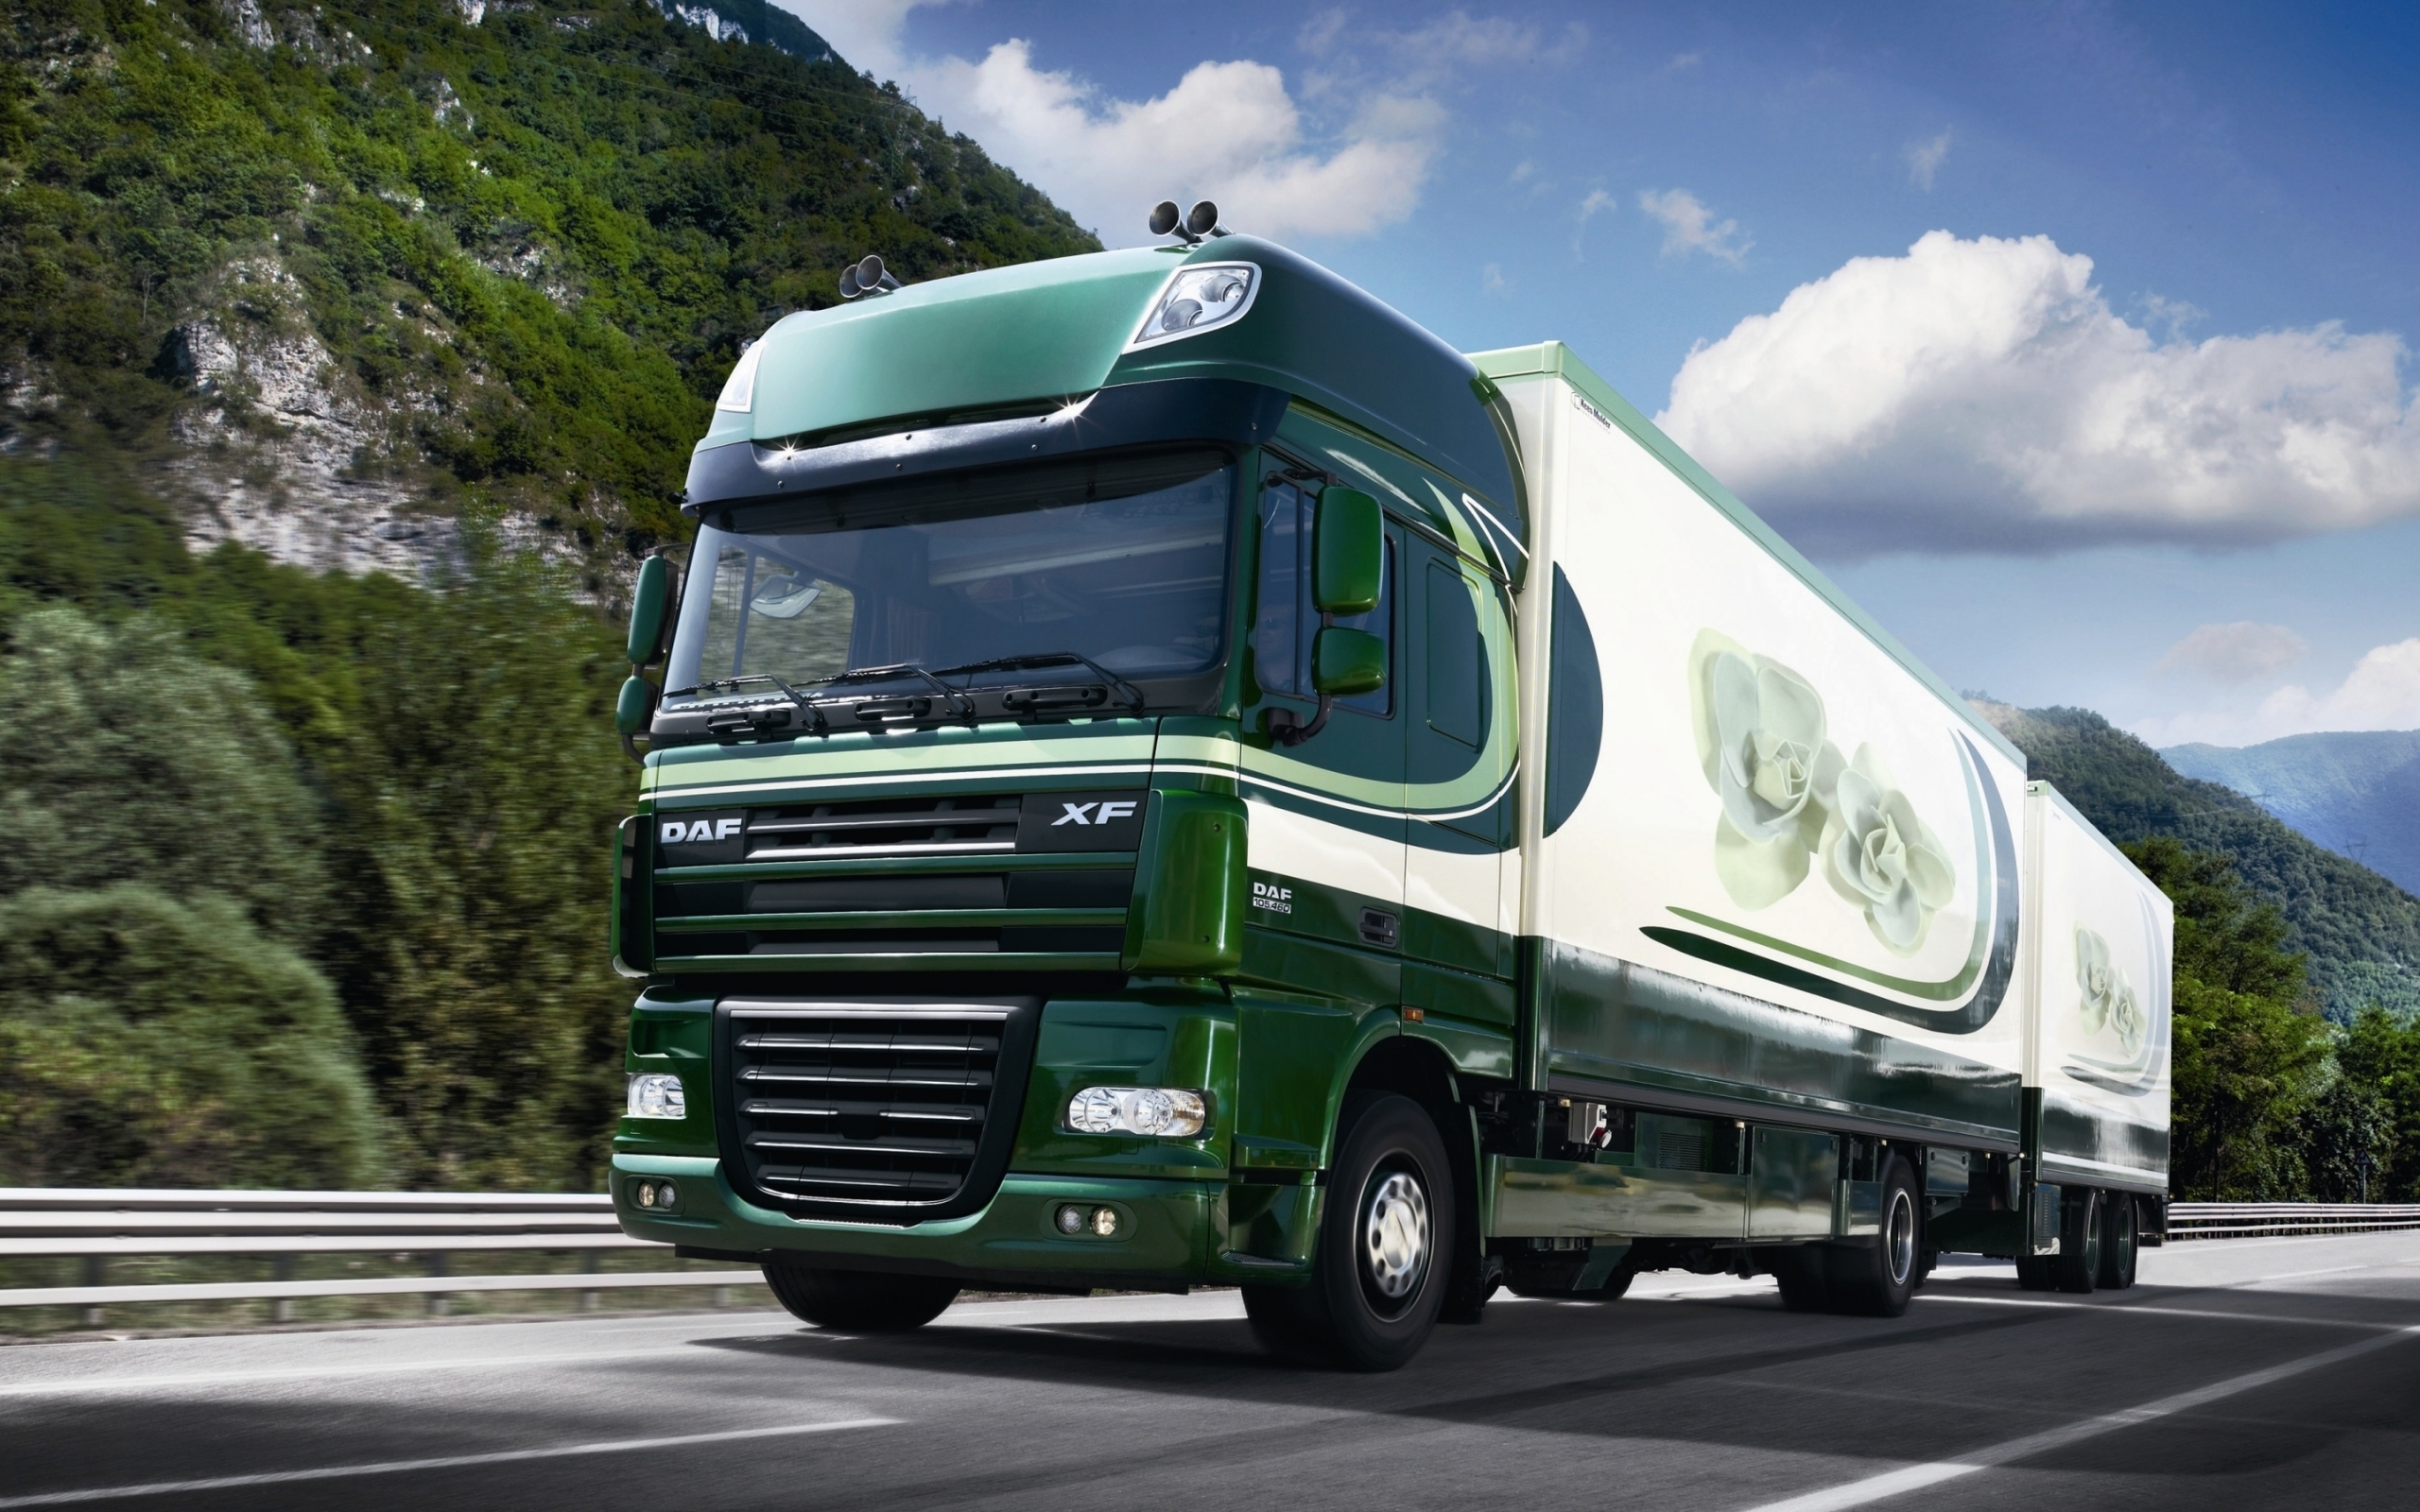 DAF XF 105 Truck for 2560 x 1600 widescreen resolution